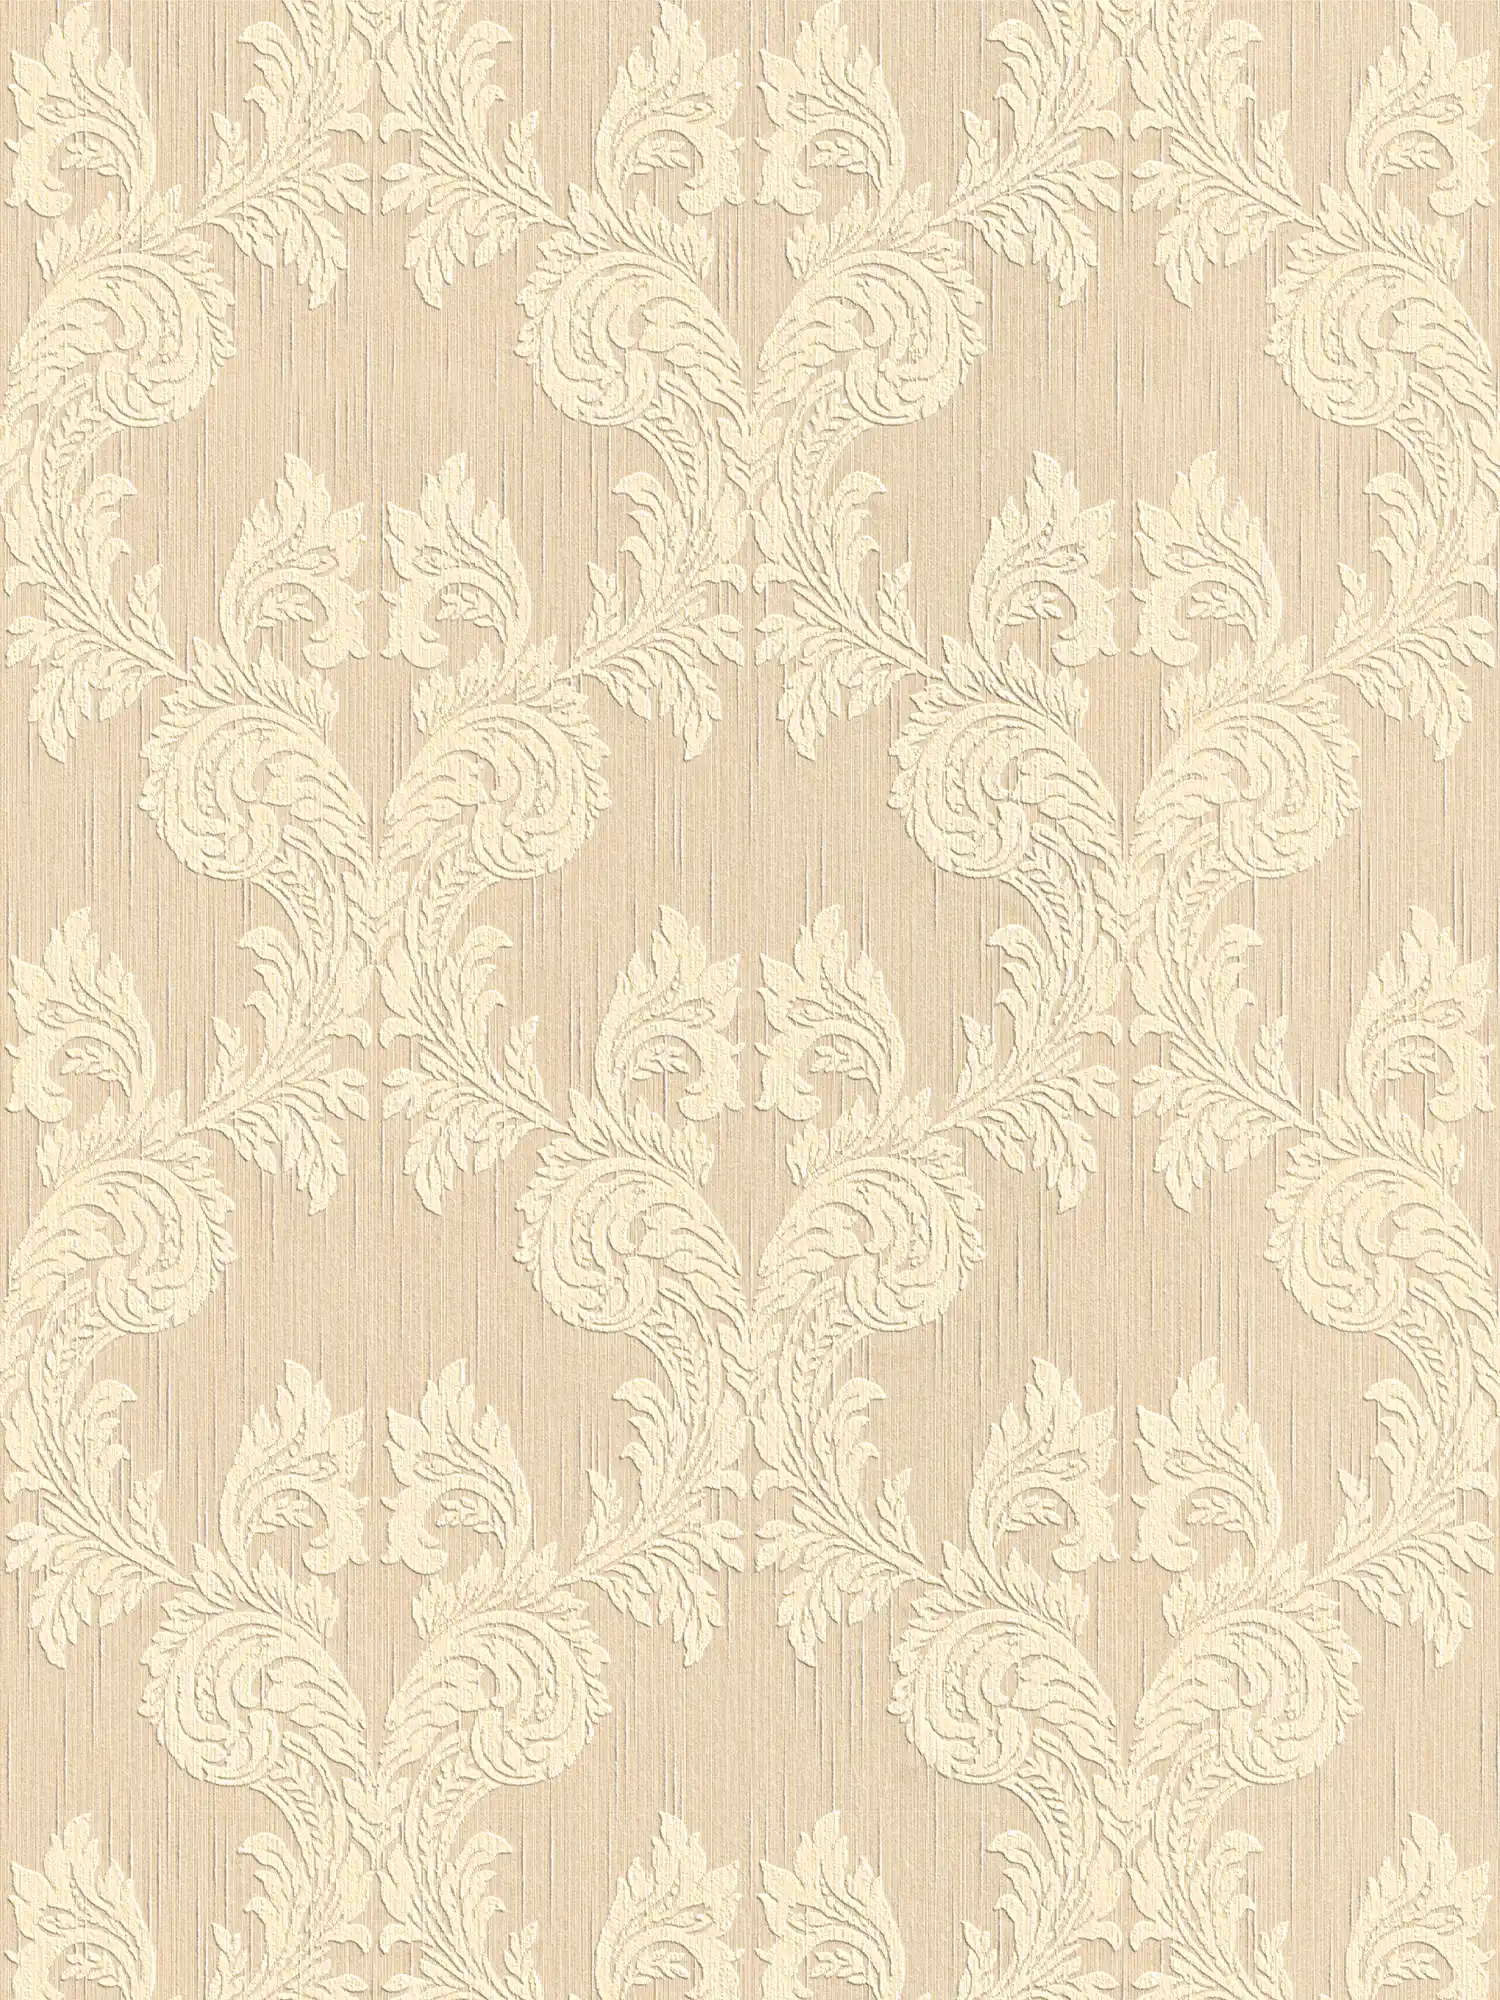 Wallpaper with textile look and ornamental pattern in classic style - beige
